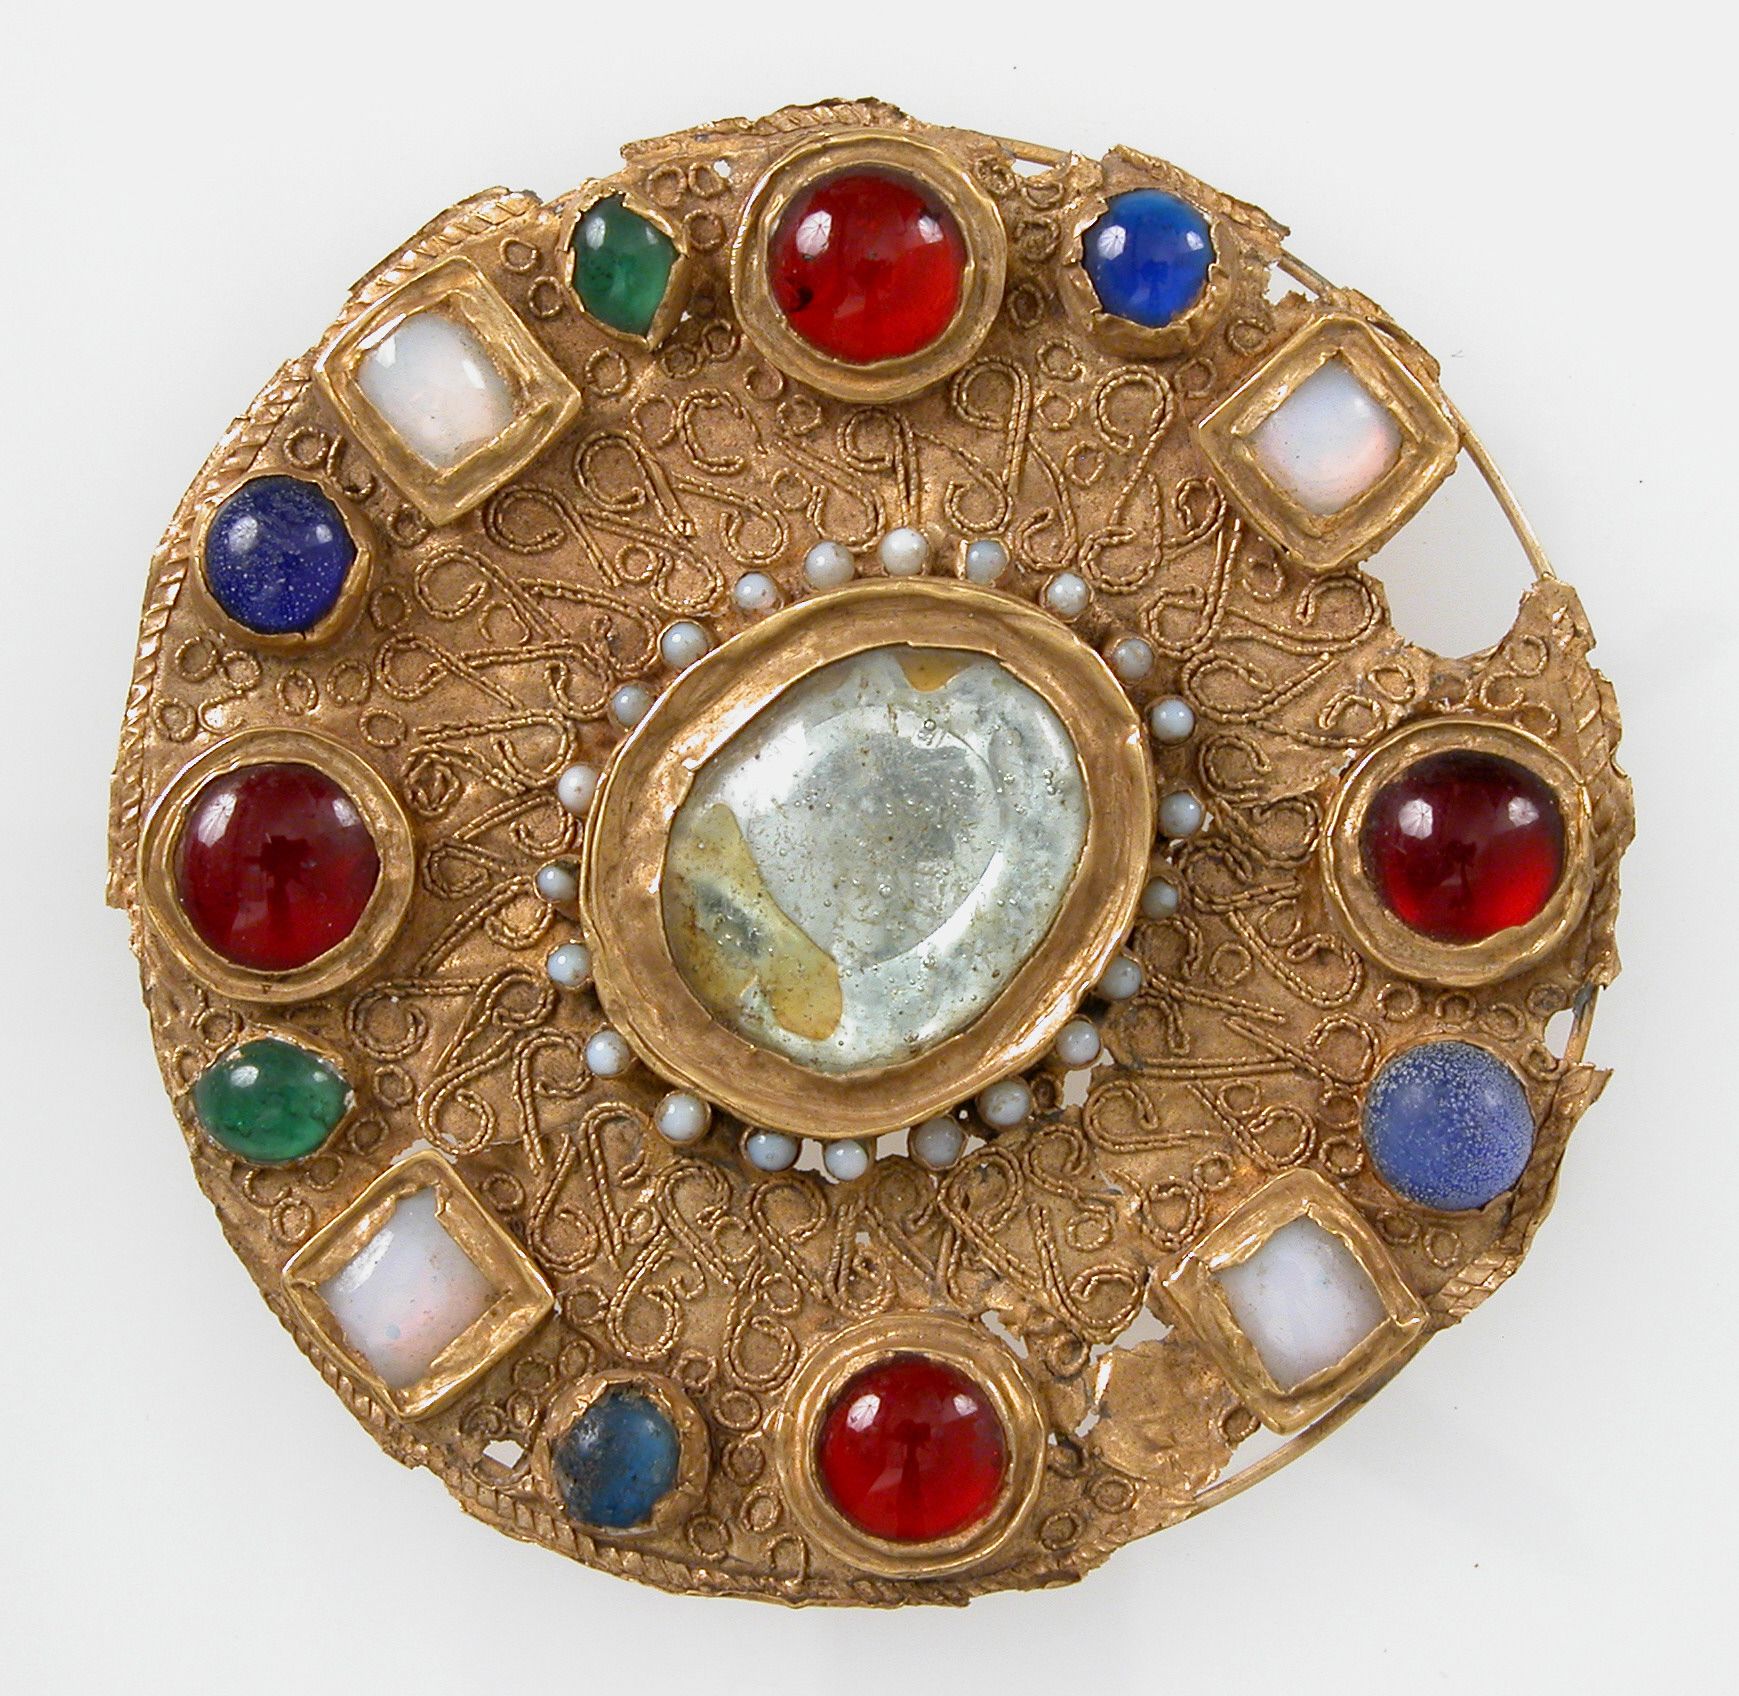 Glass stones set in a disk brooch, c. 7th century. The Metropolitan Museum of Art. 